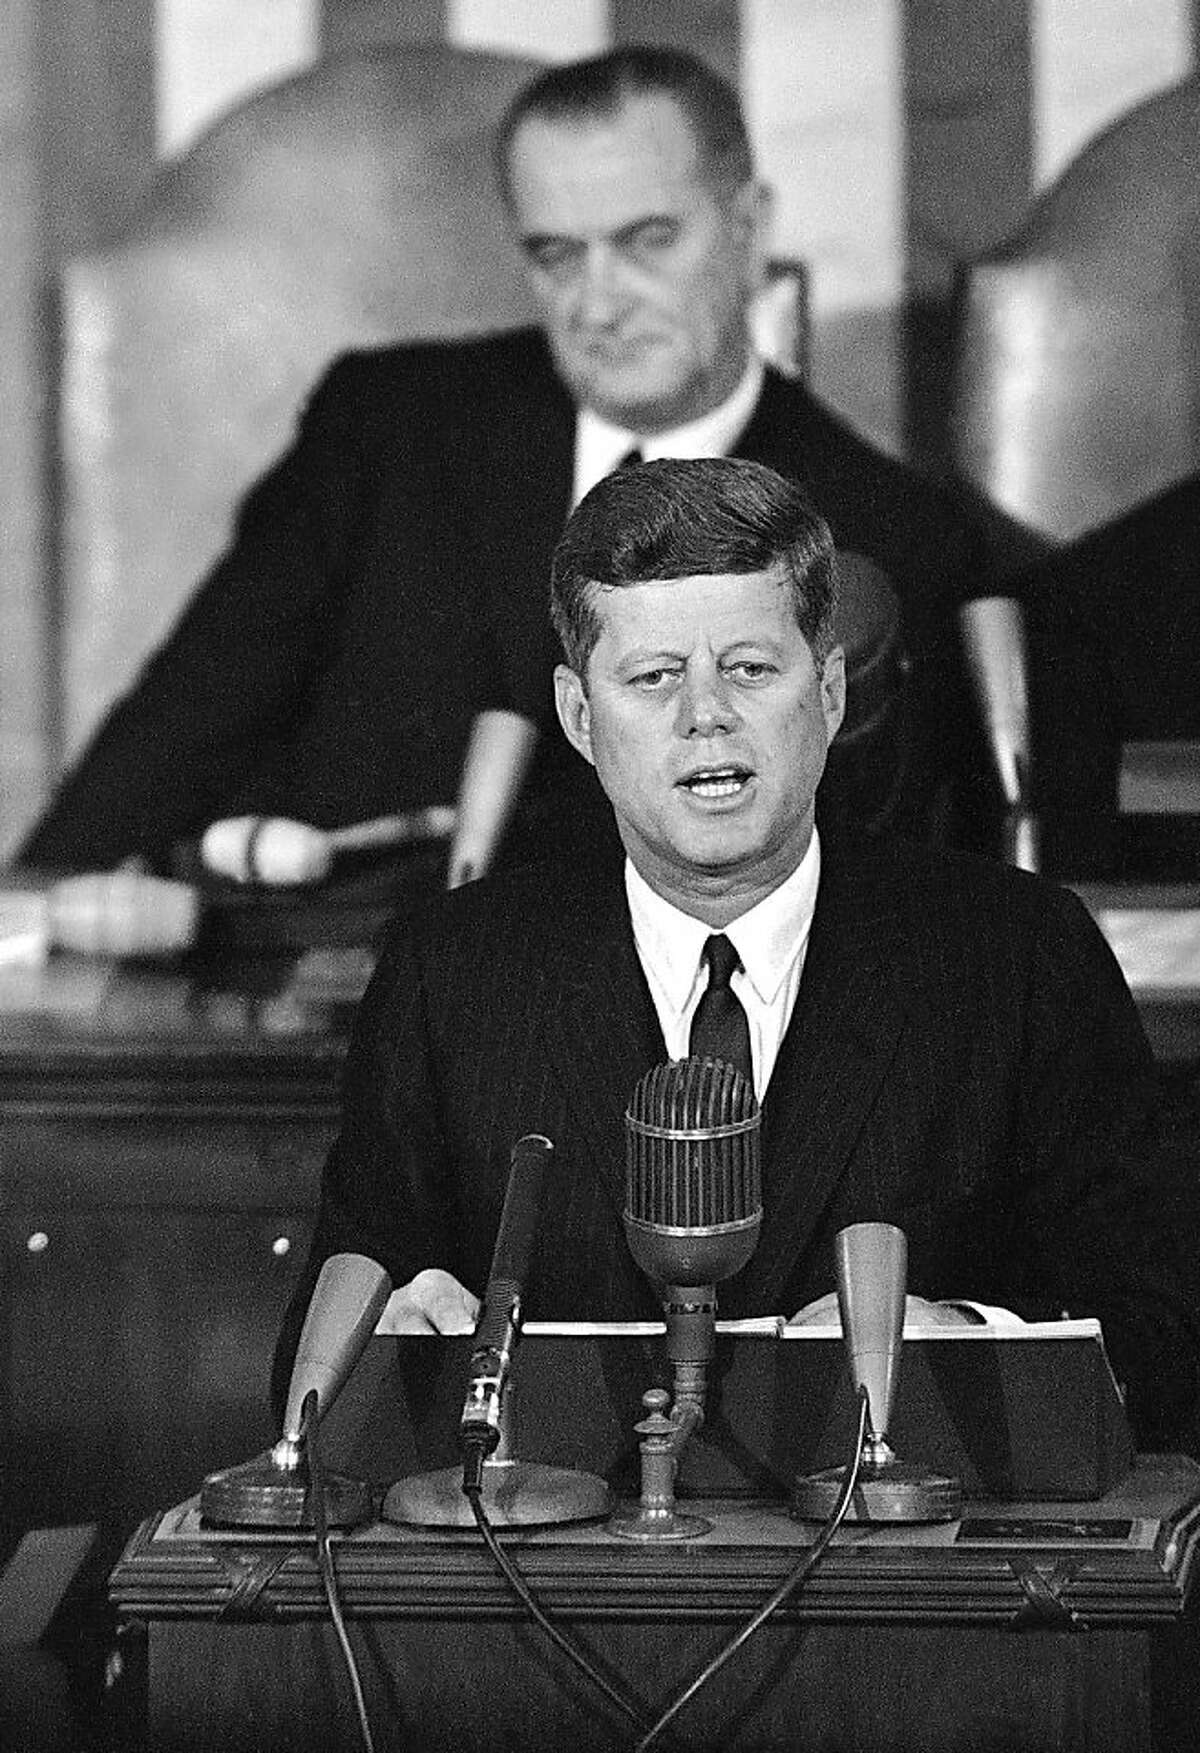 FILE - In this Jan. 14, 1963 file photo, President John F. Kennedy speaks in the House Chamber on Capitol Hill in Washington during his State of the Union report to a joint session of Congress with Vice President Lyndon Johnson sitting behind him. Kennedy's civil rights legacy has undergone substantial reassessment since his Nov. 22, 1963, assassination. His successor, President Johnson, receives credit for hammering through the monumental Civil Rights Act and Voting Rights Act, which ensured full citizenship for African-Americans. (AP Photo/File)